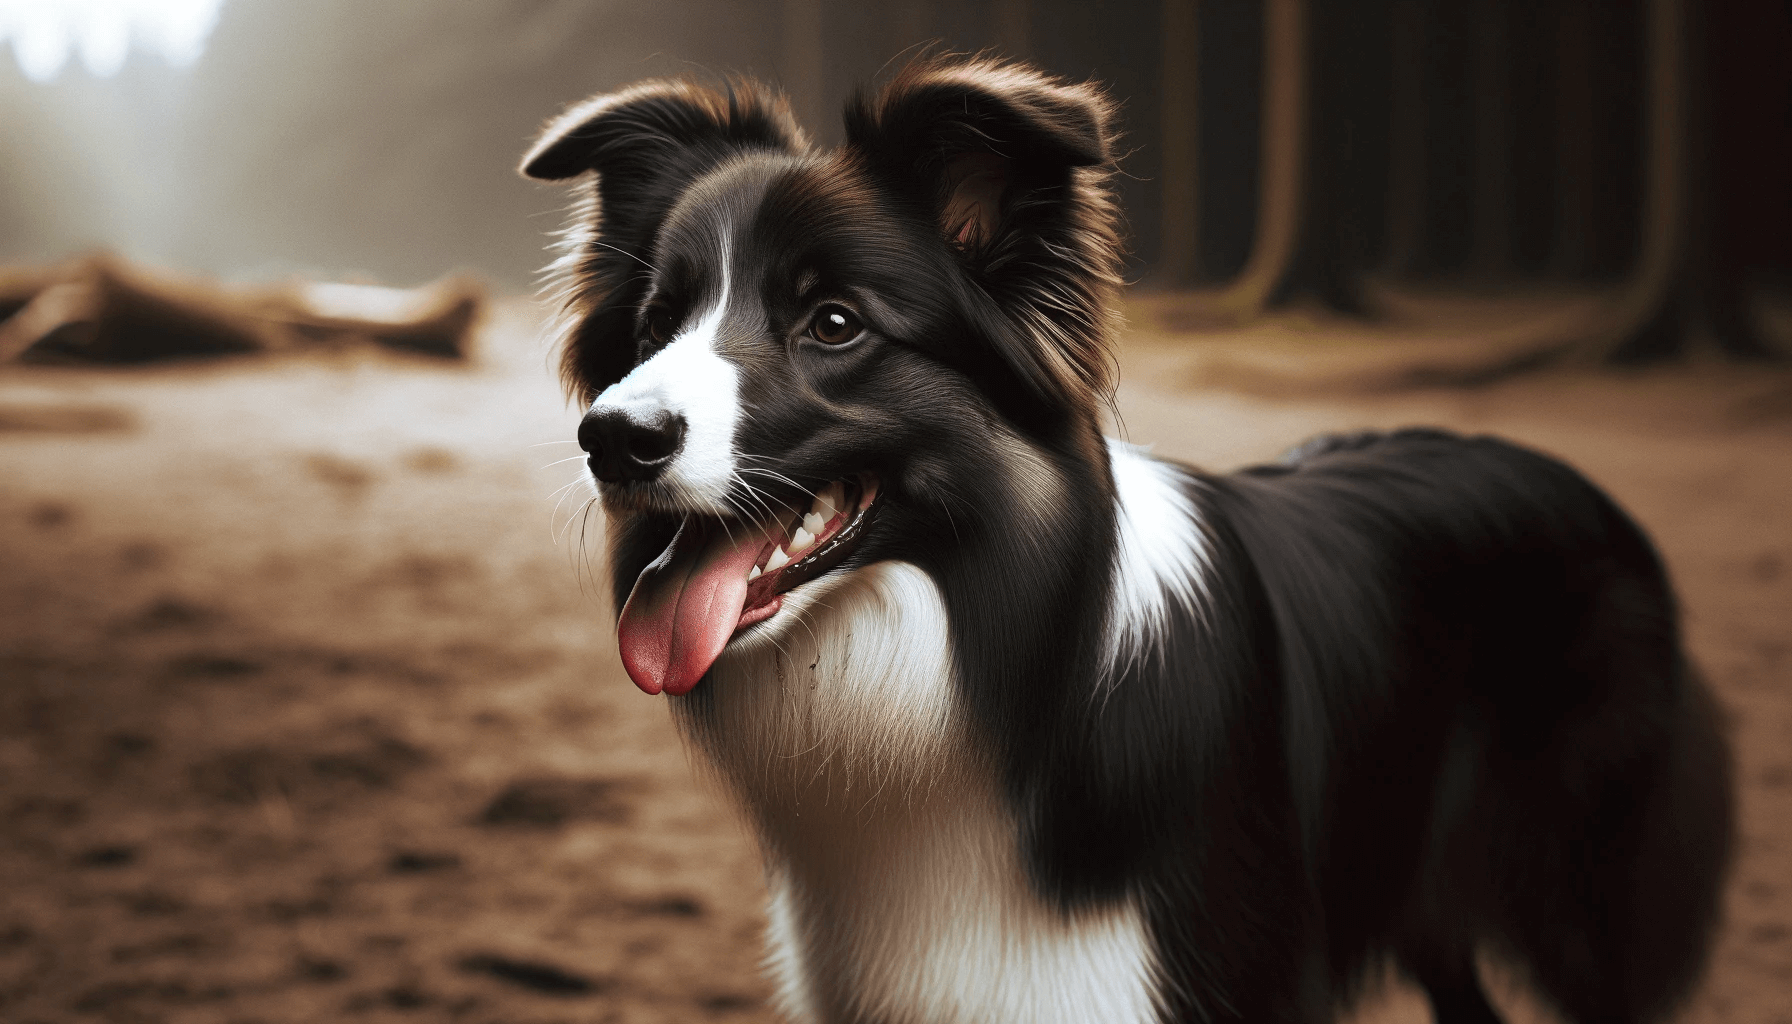 Smooth Coat Border Collie standing on a dirt surface, tongue out, possibly panting indicating recent activity or play.